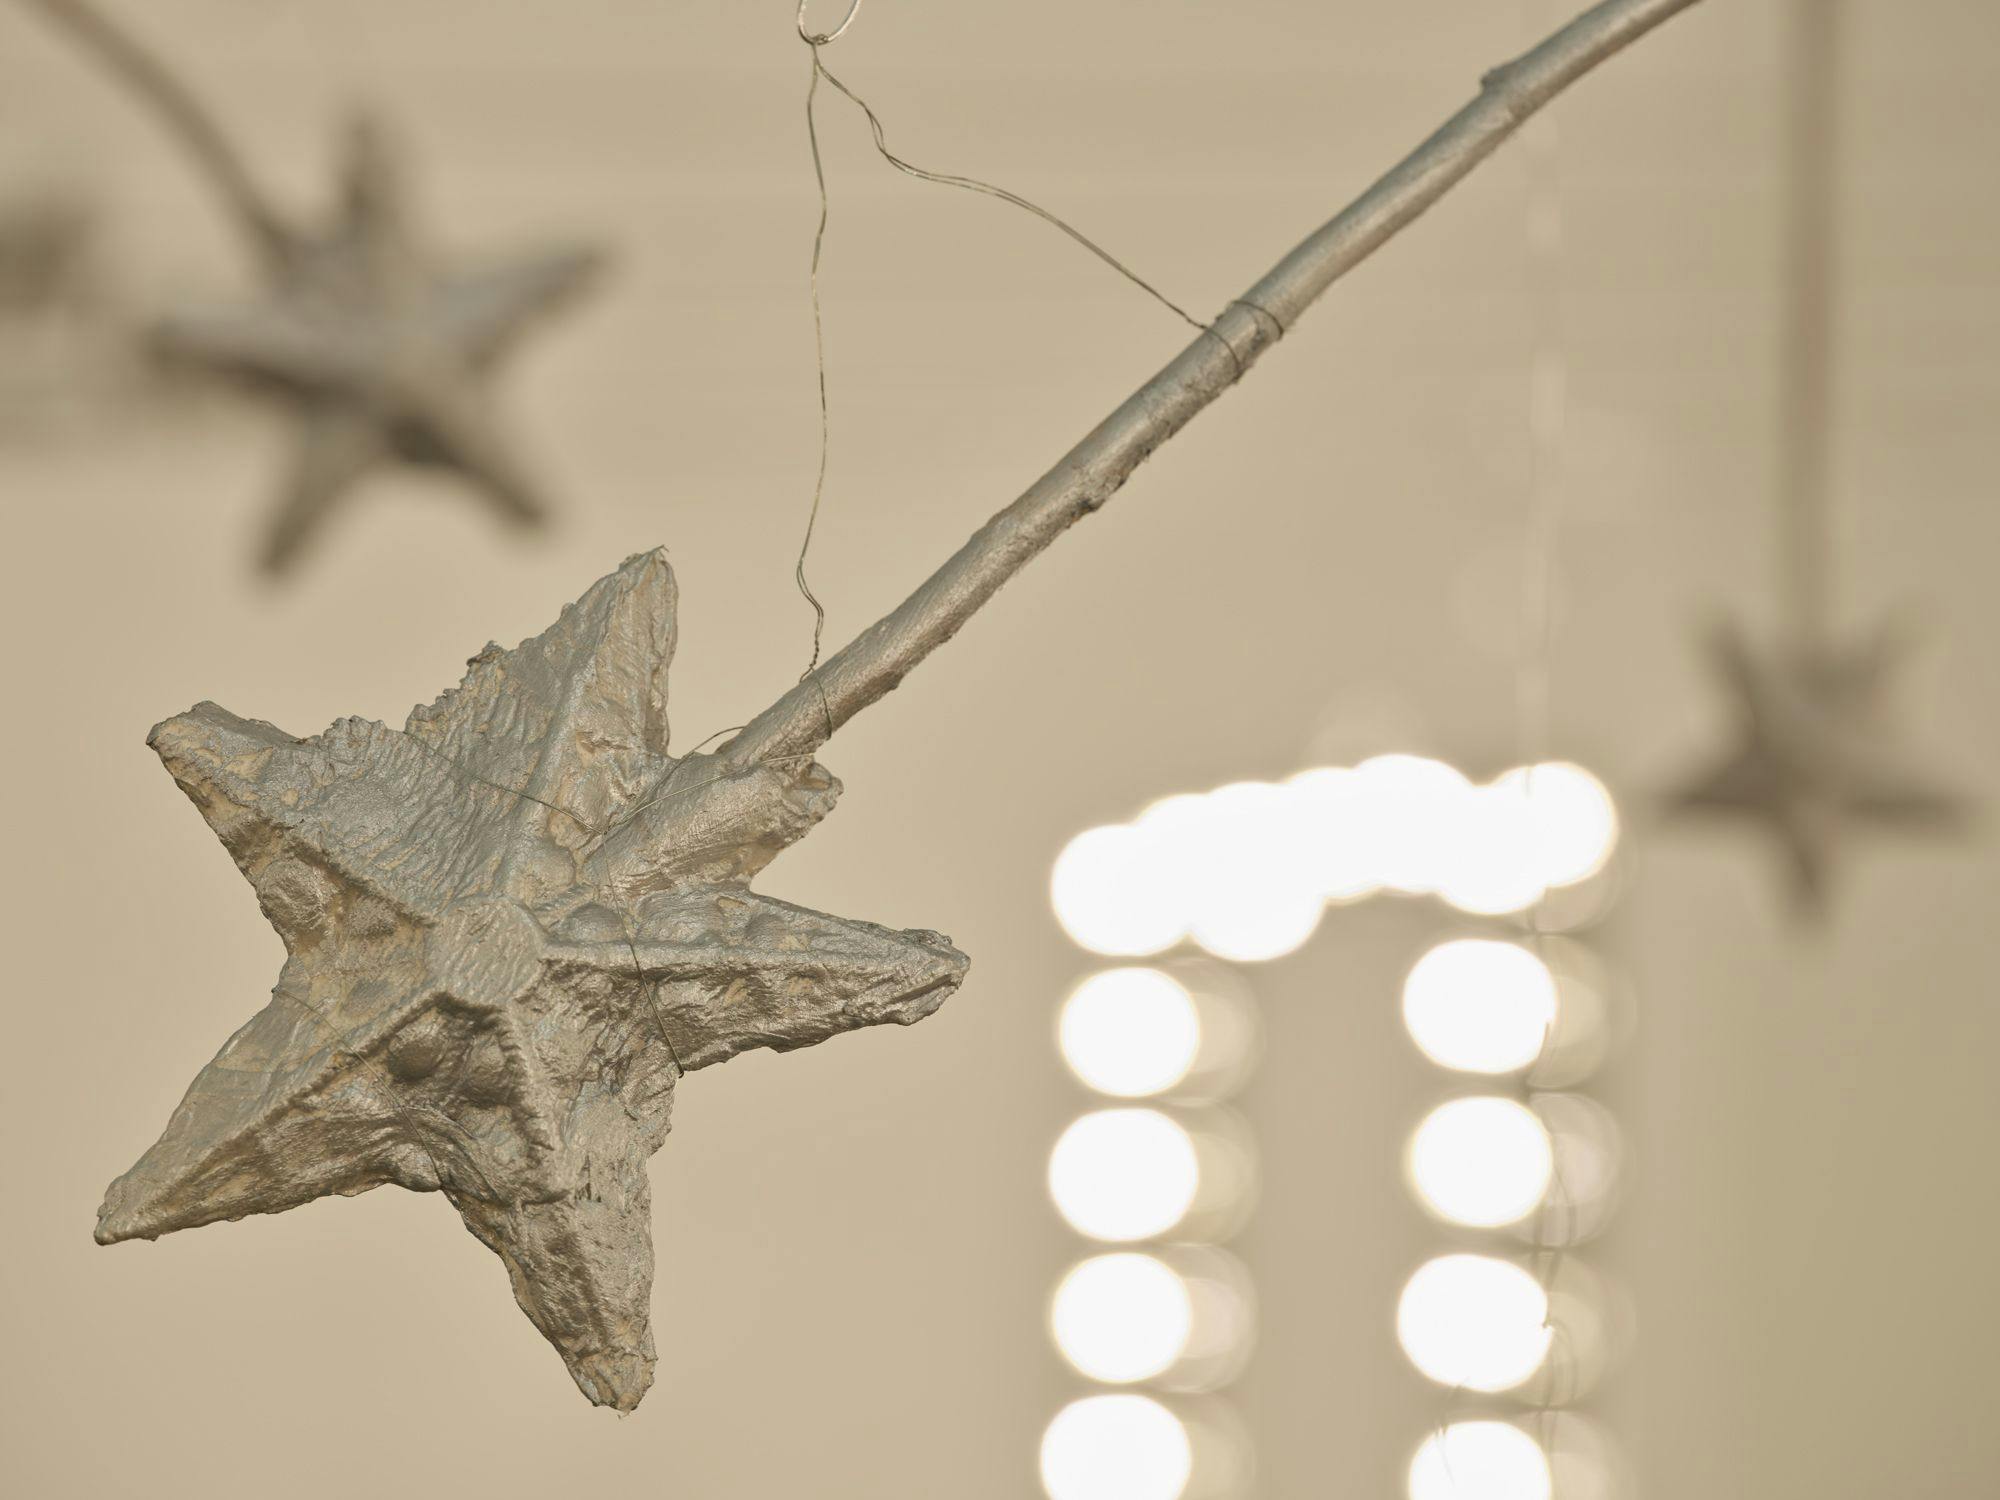 A detail view of a silver magic wand. In the background are a vanity light and more magic wands hanging from wire.